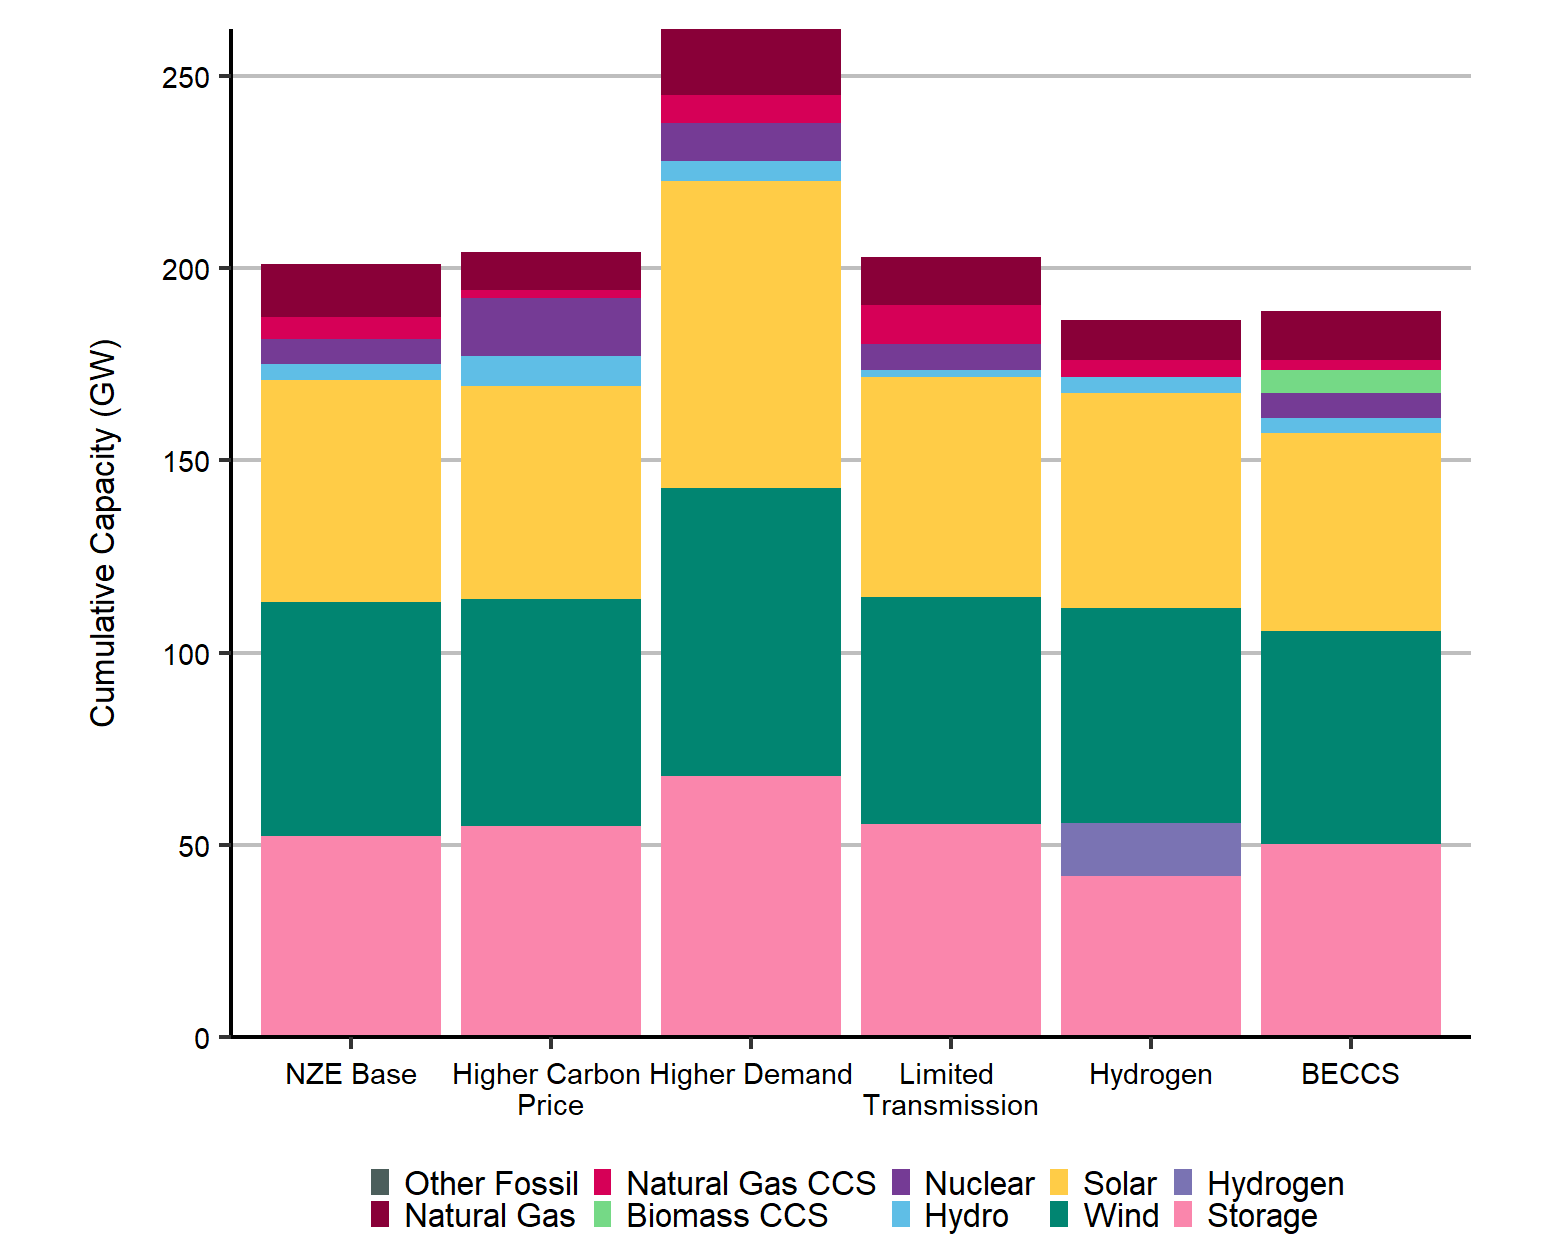 Cumulative New Capacity Additions by 2050 in Different Scenarios